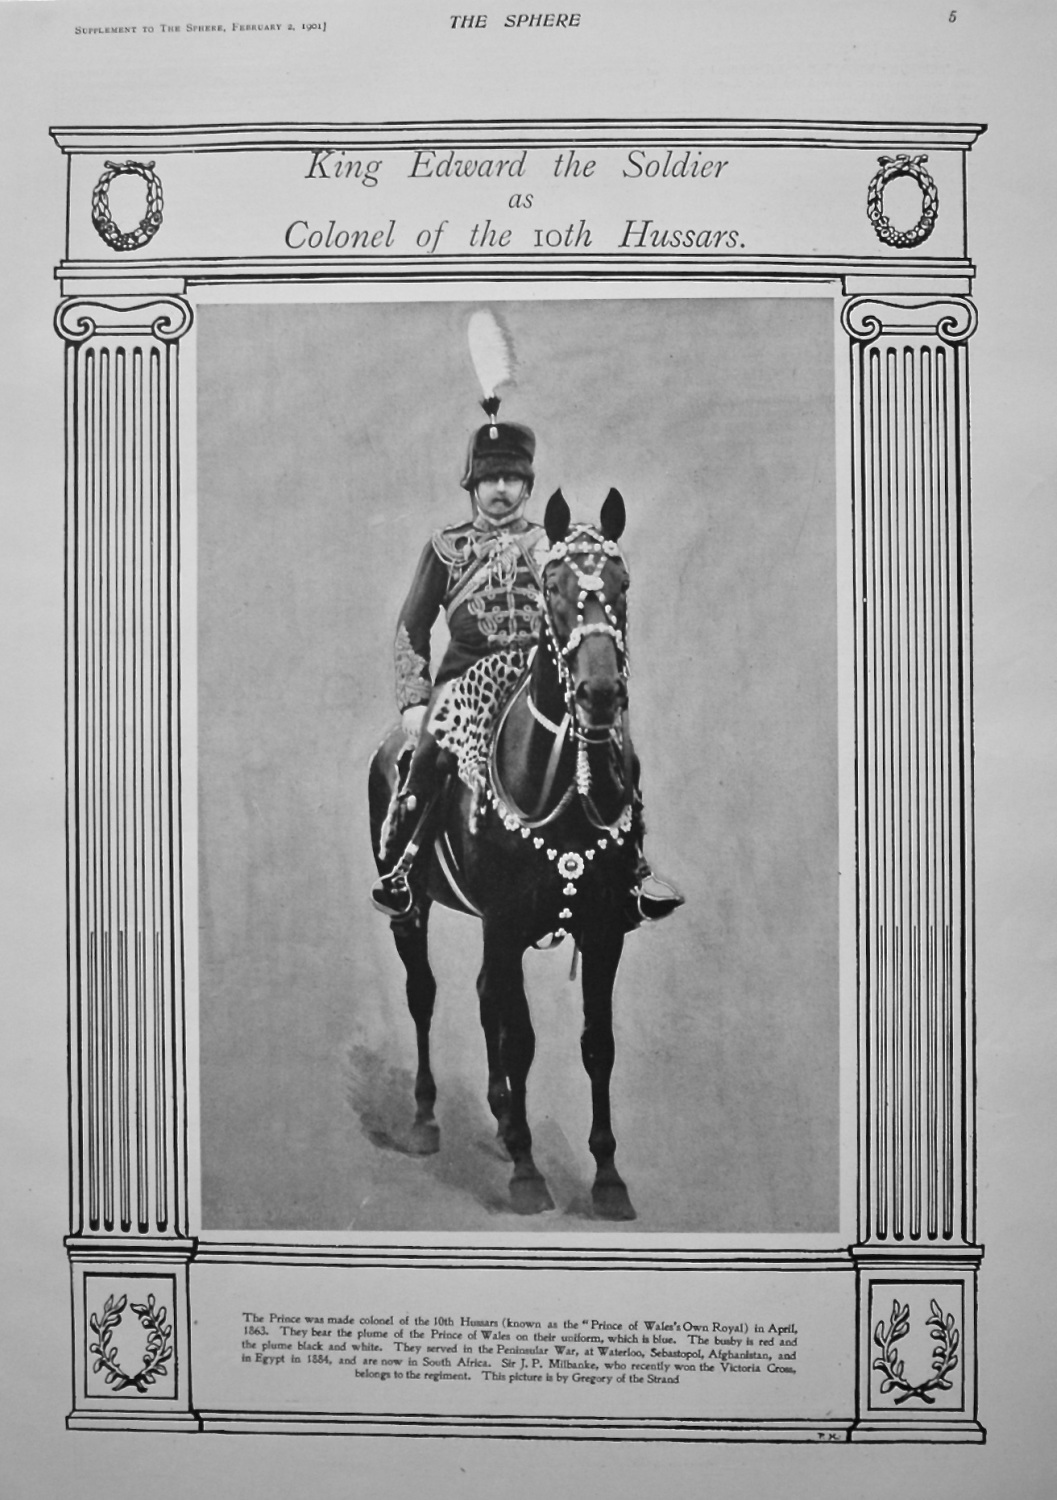 King Edward the Soldier as Colonel of the 10th Hussars. 1901.